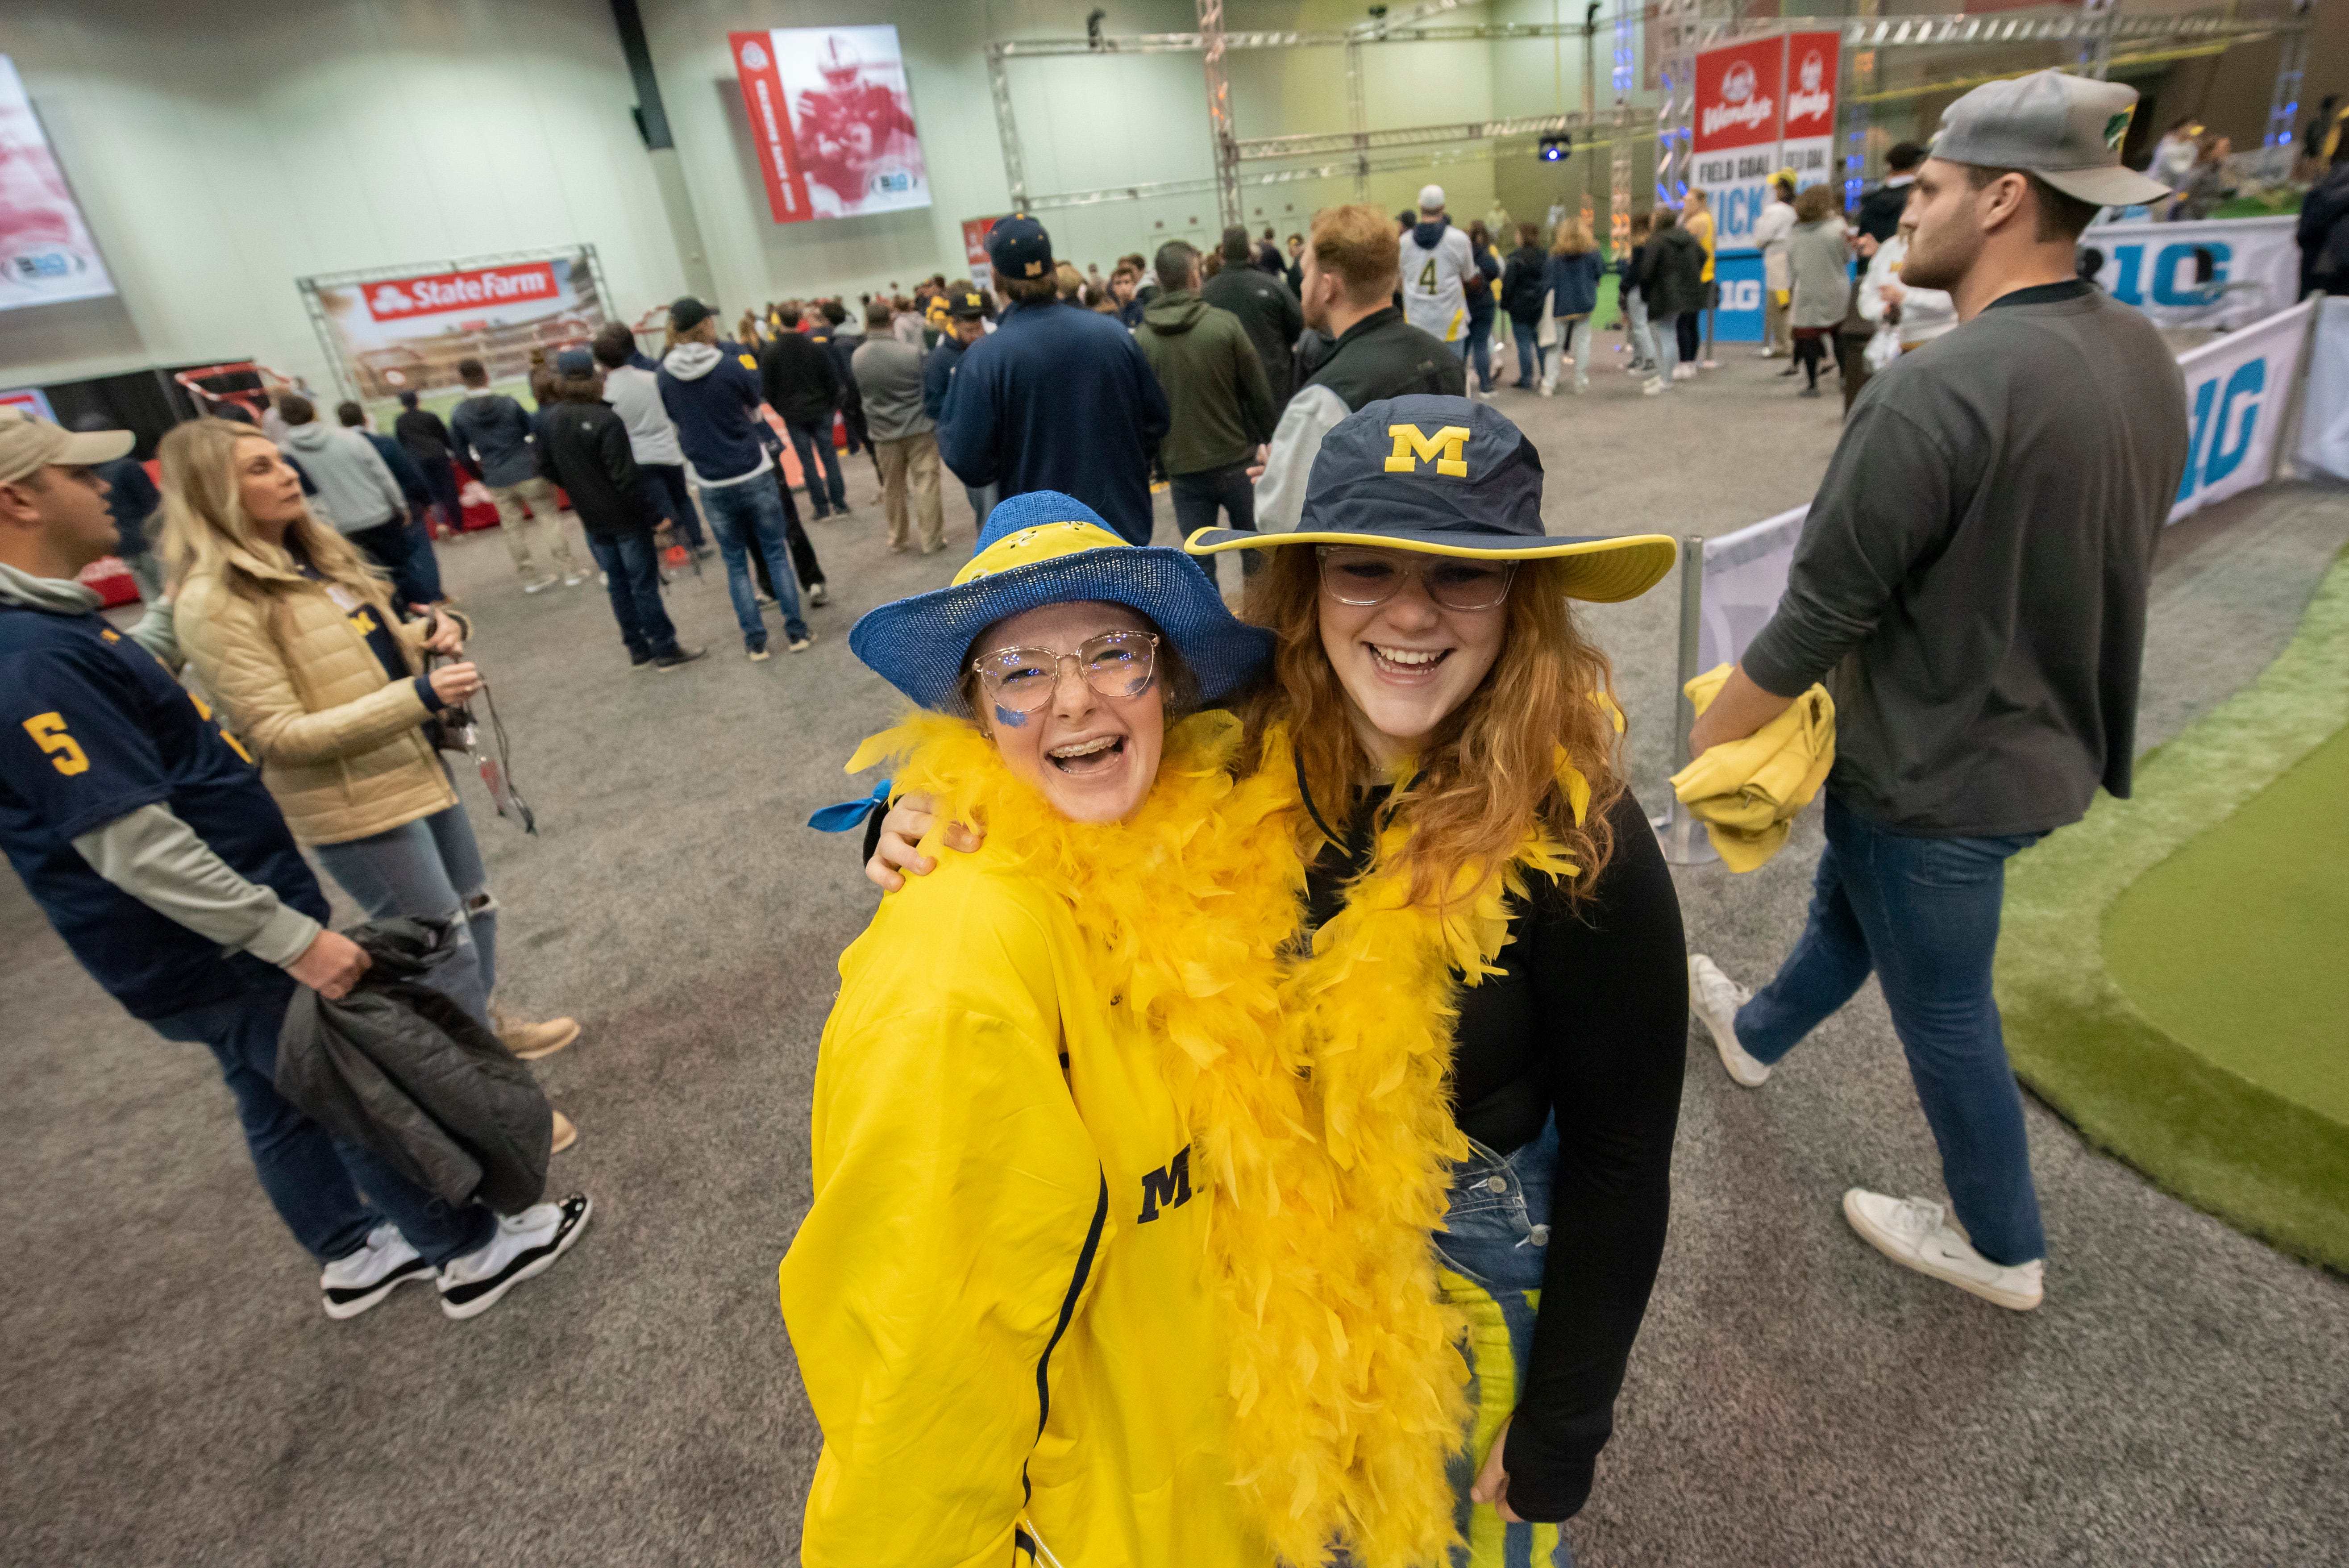 Kayley Gotham, left, and Sam Bocock, of South Haven, have fun at the Fan Fest at the Indiana Convention Center, before the start of the Big Ten championship game.